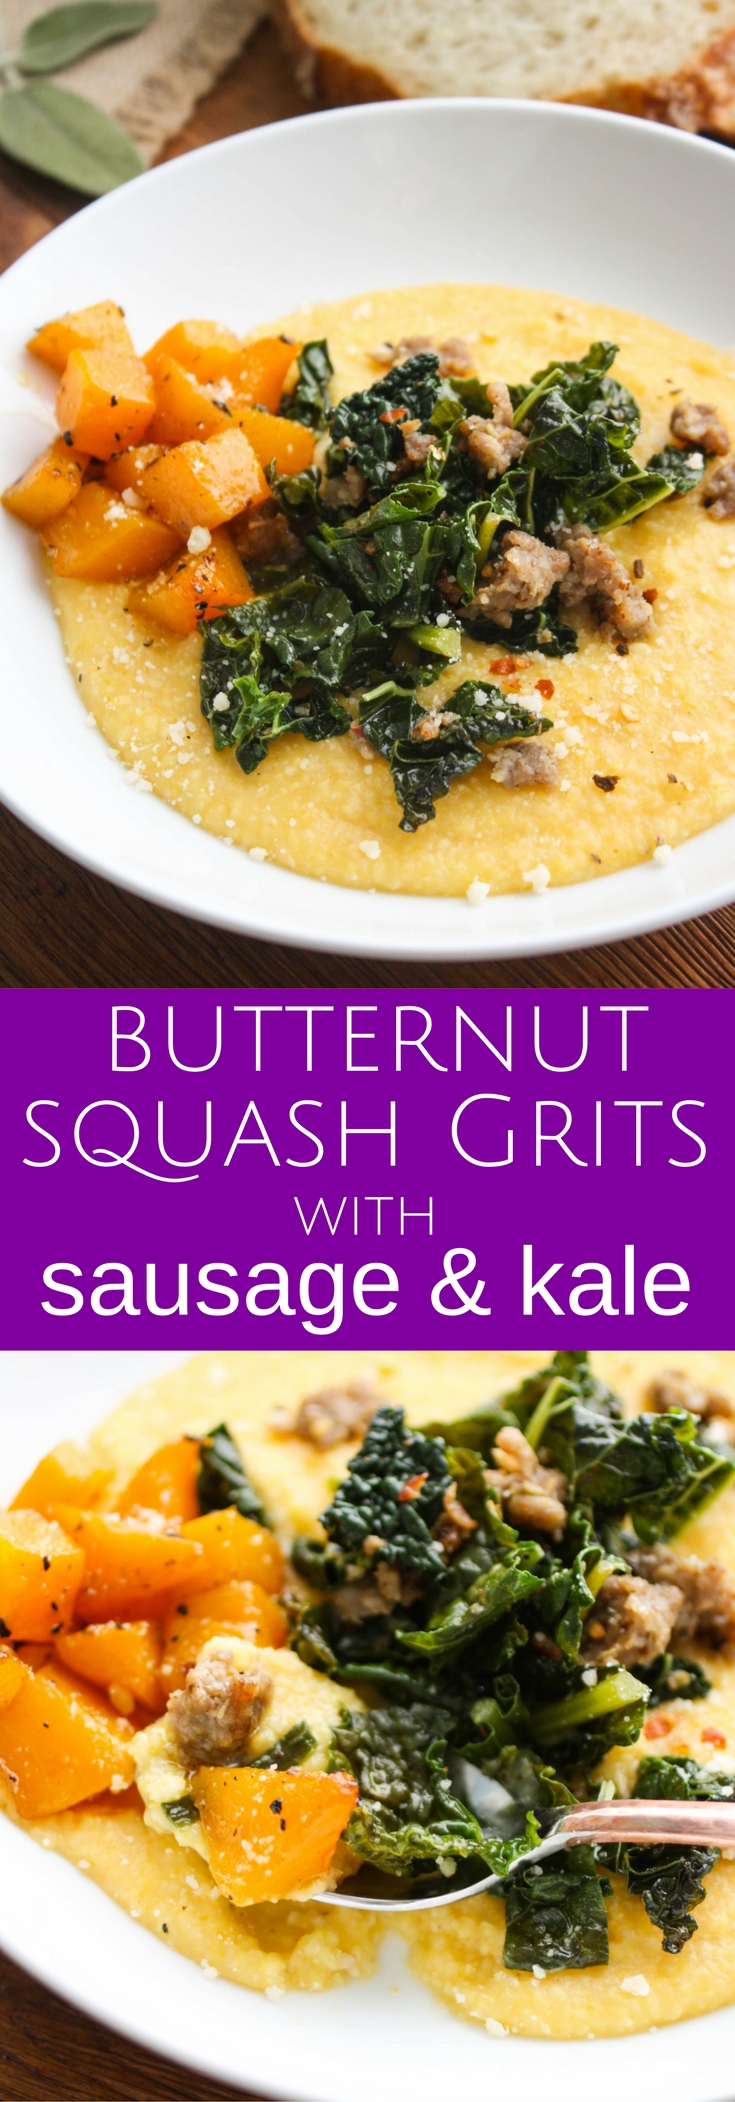 Butternut Squash Grits with Sausage and Kale is a hearty and flavorful dish on a chilly night. You'll love the ingredients in this grits dish!